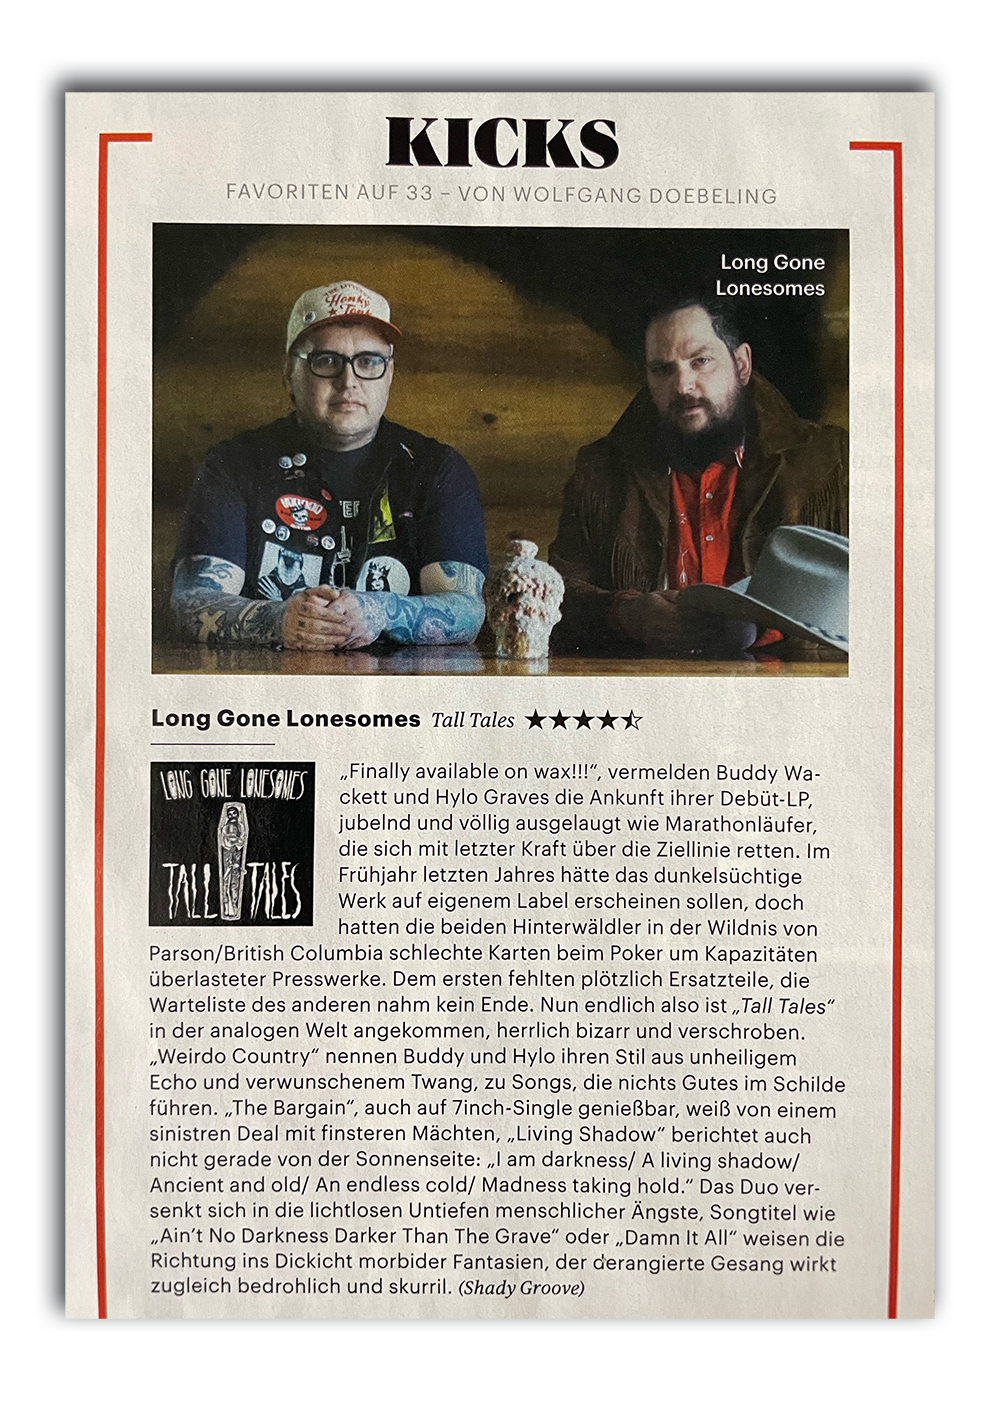 Kicks review of Long Gone Lonesomes in Rolling Stone Magazine.